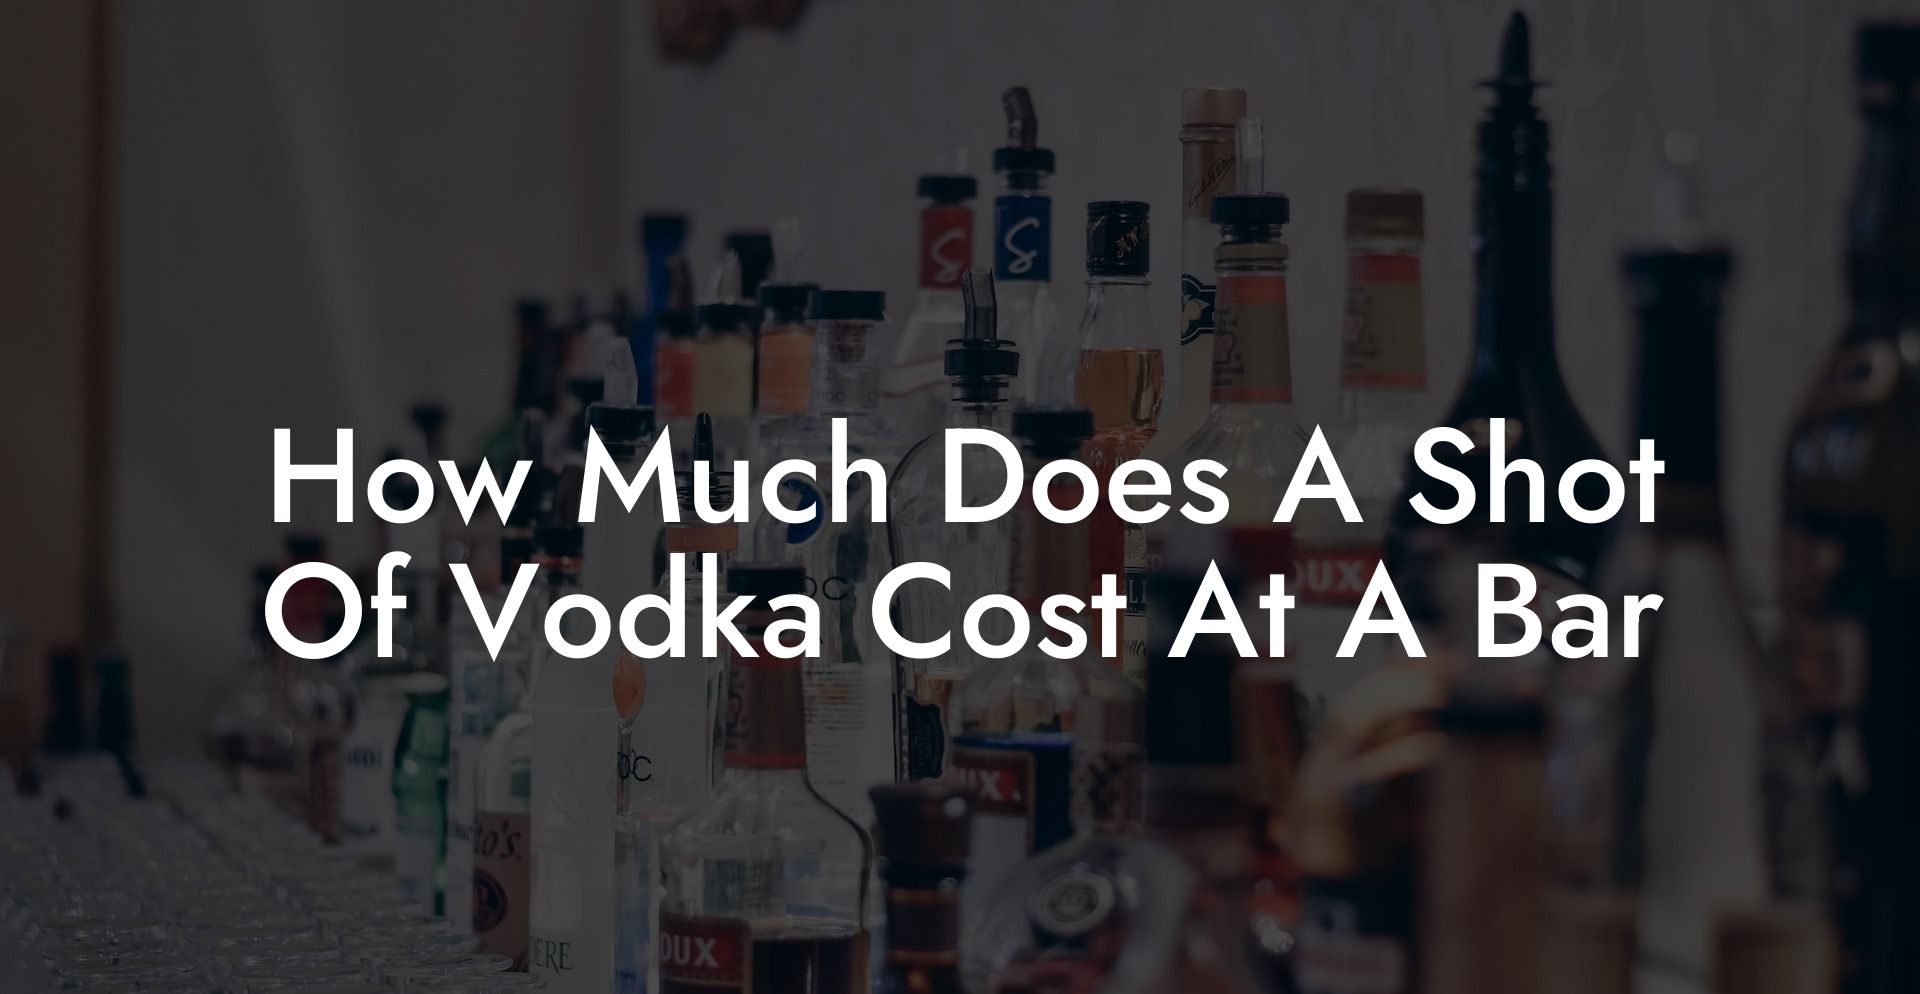 How Much Does A Shot Of Vodka Cost At A Bar